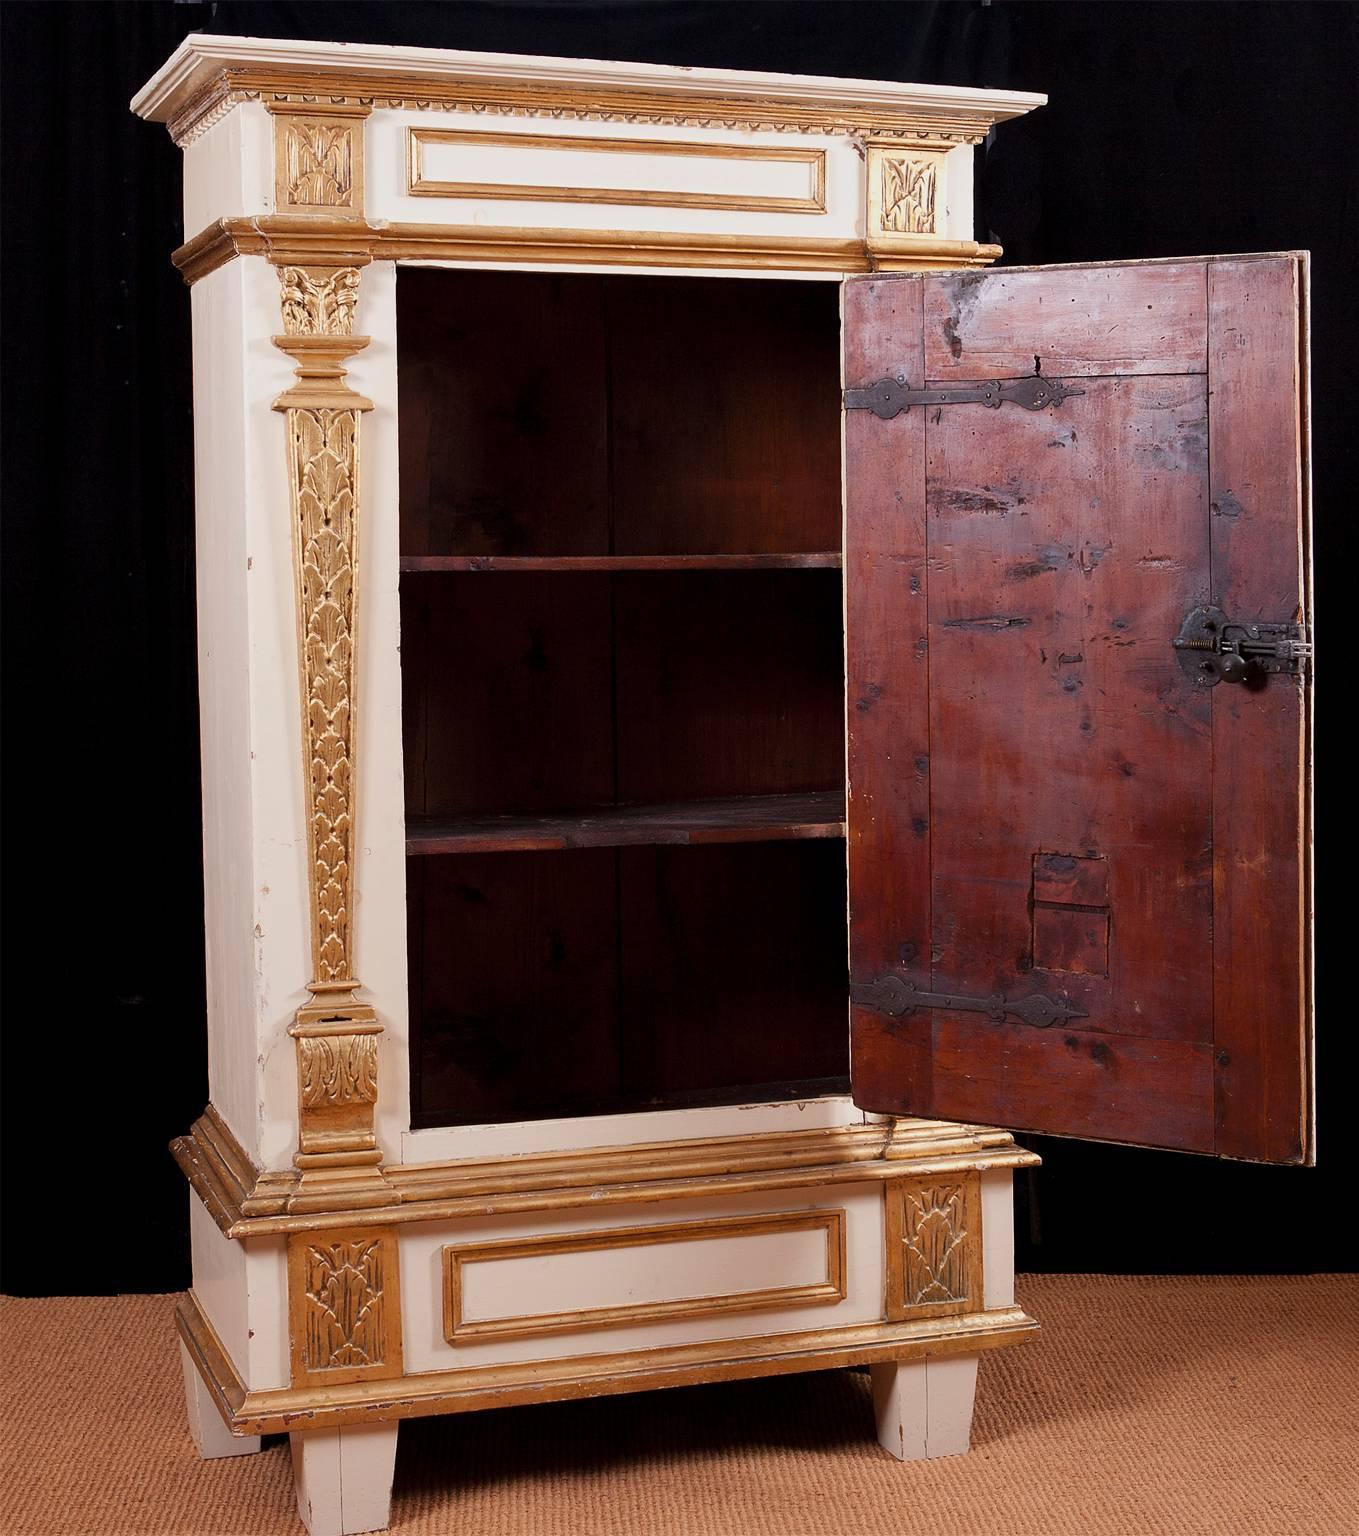 An intact baroque single-door armoire from the time of Mozart, with all its original forged iron hardware. The paint on the armoire is a 20th century European type alkyd paint as are the gold painted embellishments. The wood is Kiefer pine which is